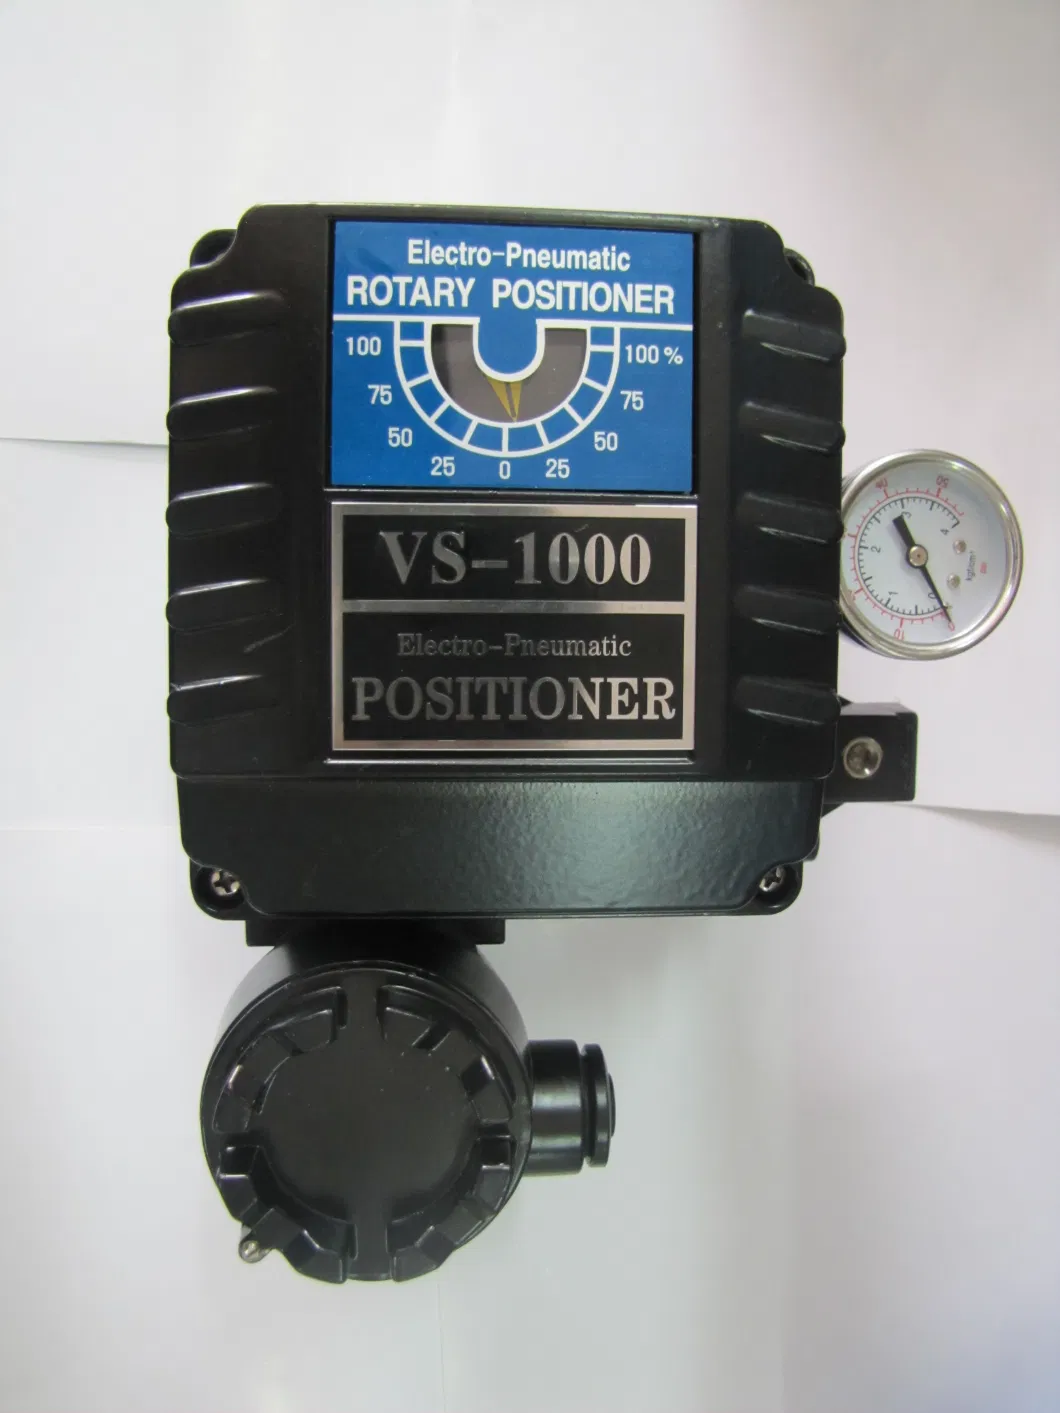 Ep Positioner Mounted on a Diaphragm Pneumatic Actuator, Moves The Actuator